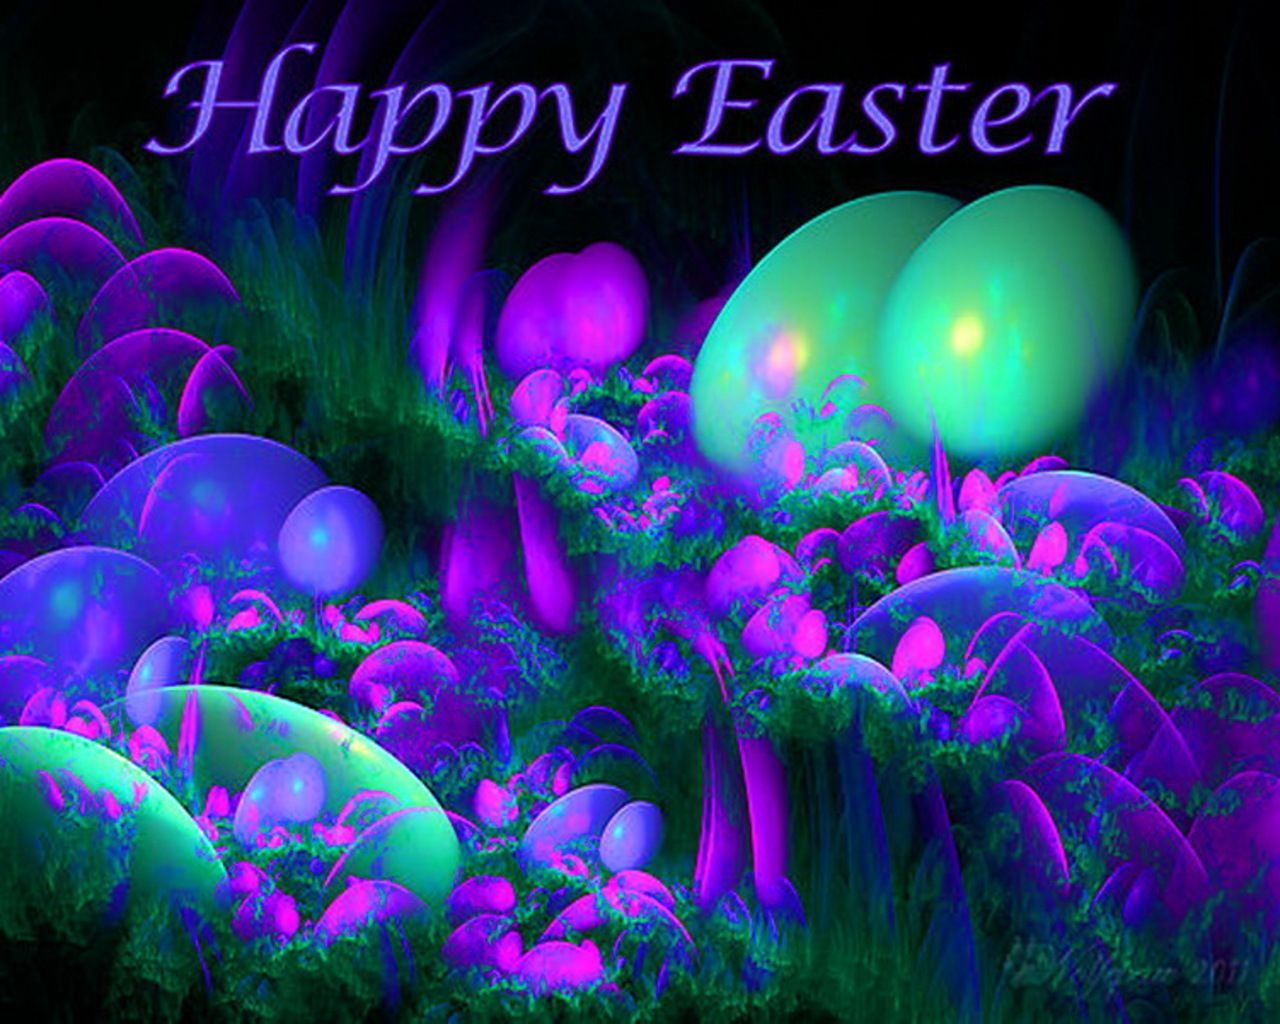 Bright Colors Wallpaper: HAPPY EASTER!. Happy easter wallpaper, Happy easter picture, Easter image